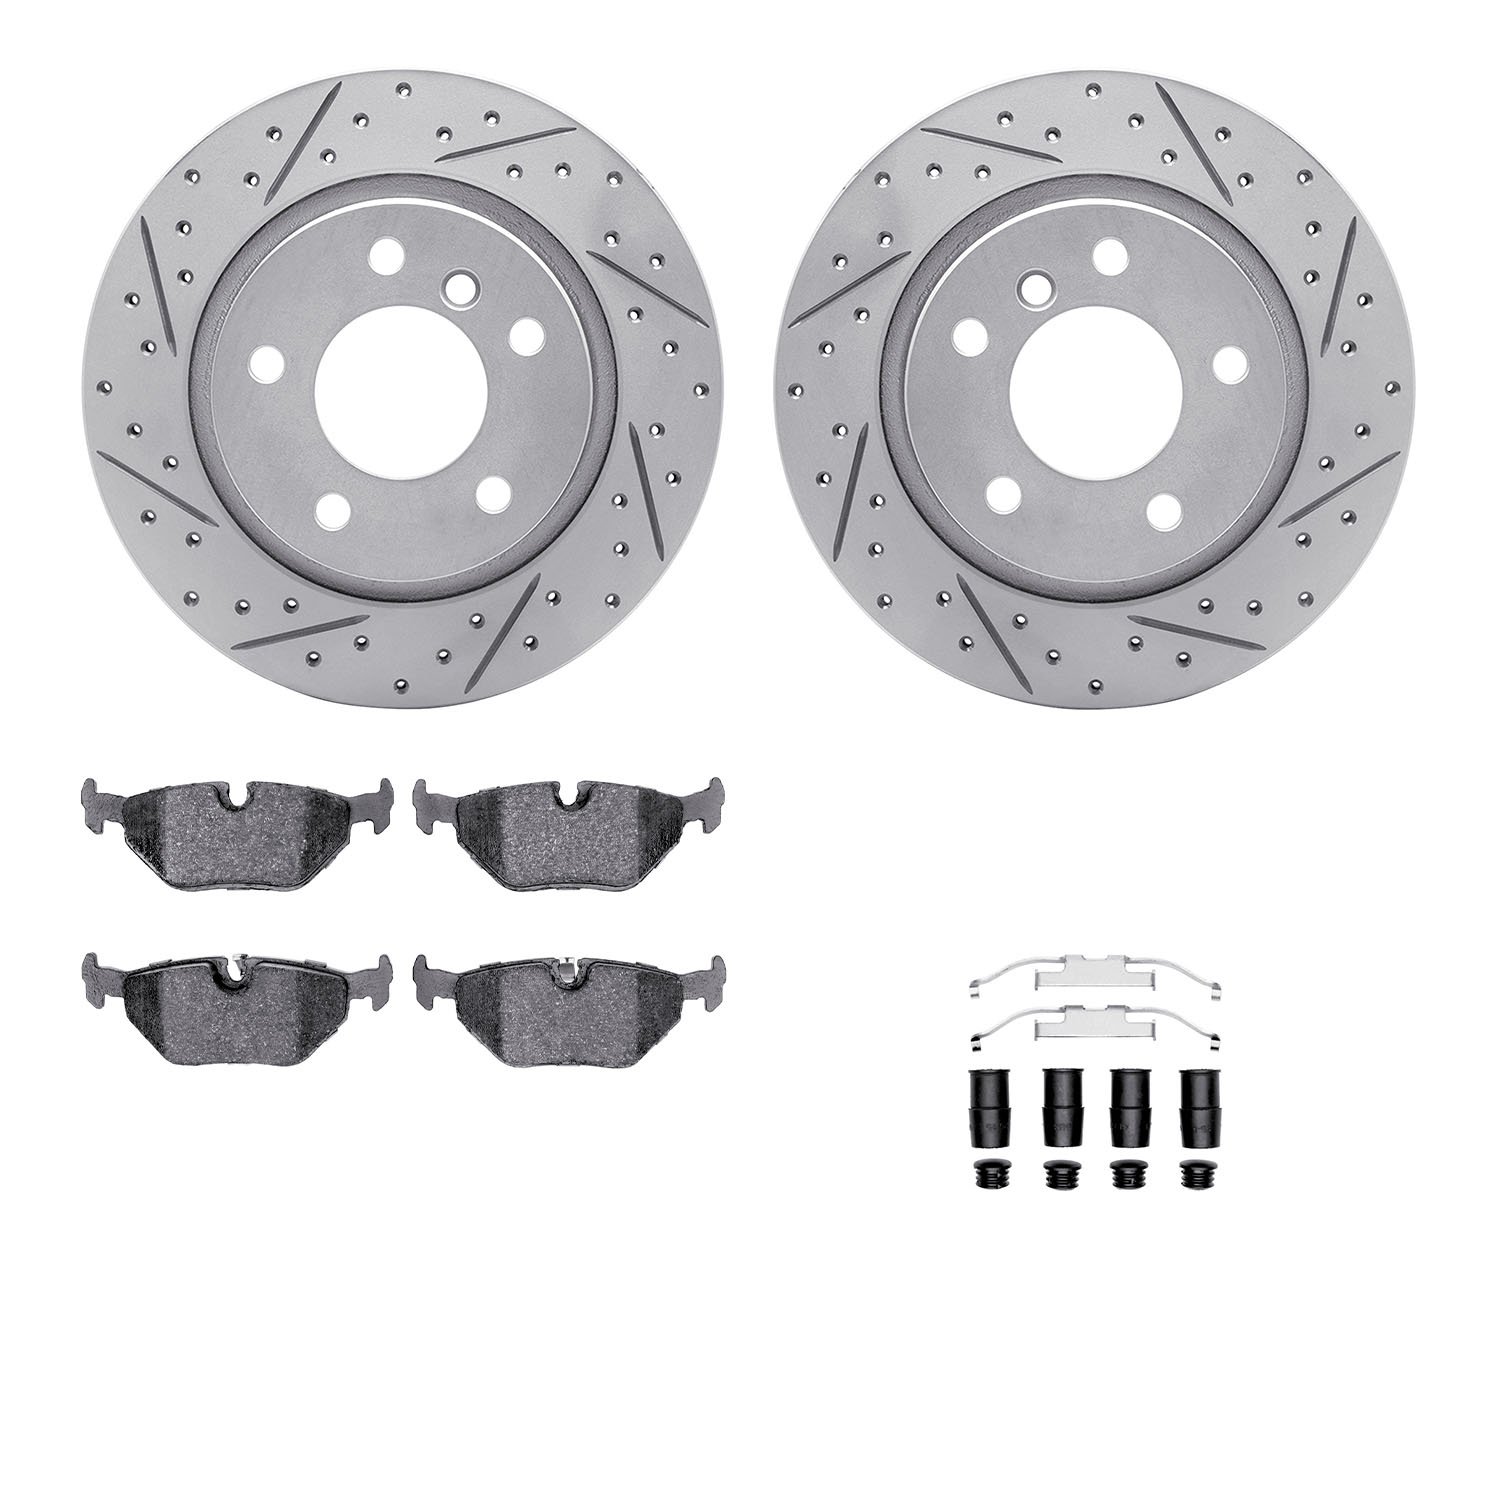 2512-31239 Geoperformance Drilled/Slotted Rotors w/5000 Advanced Brake Pads Kit & Hardware, 2003-2008 BMW, Position: Rear